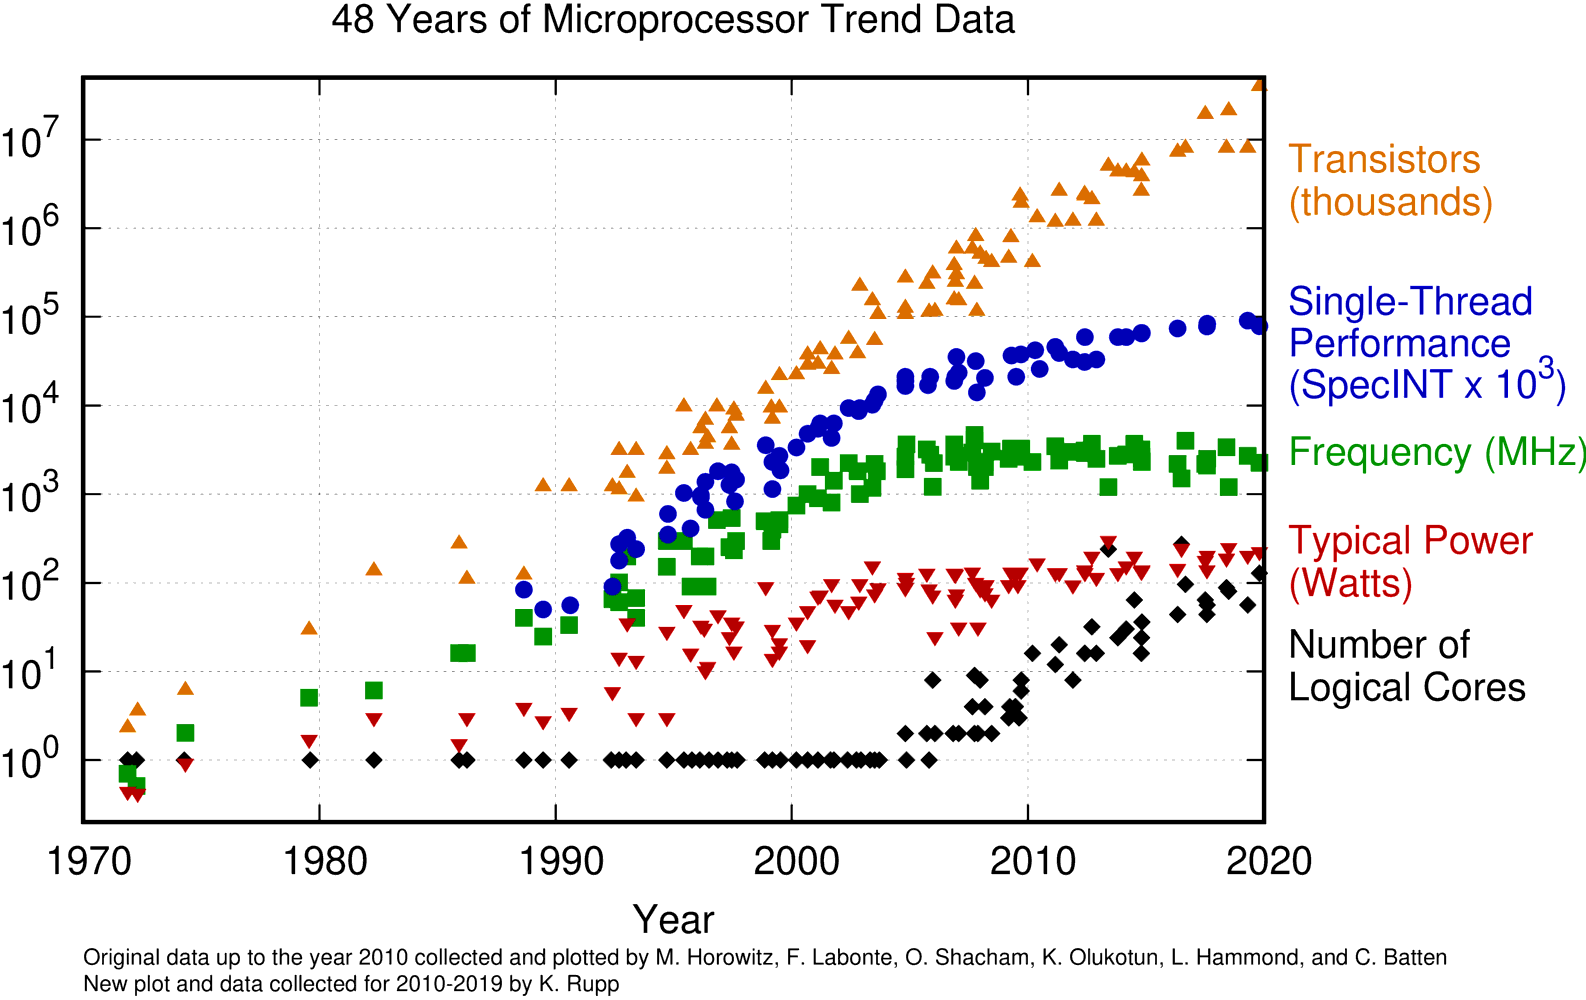 48 years of microprocessor trend data (image by Karl Rupp)